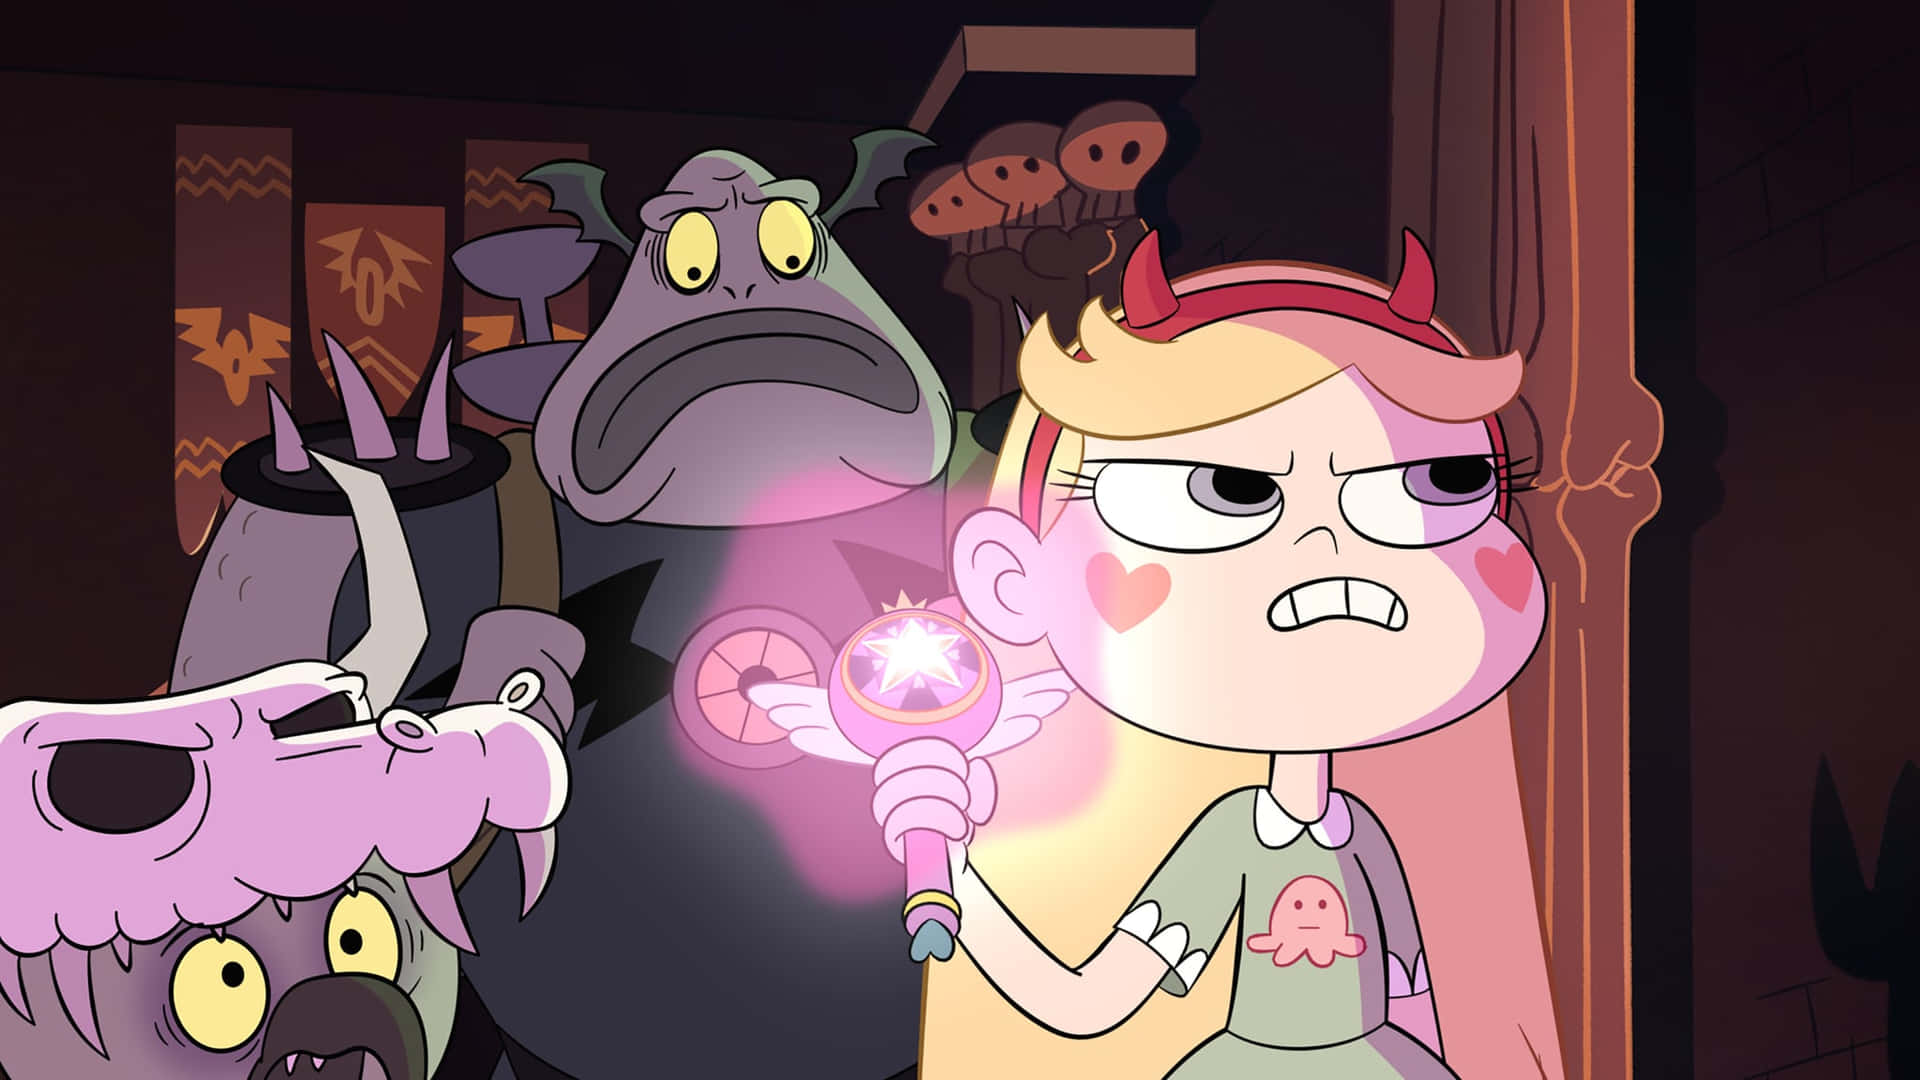 Get ready for an out-of-this-world adventure with Star Vs The Forces Of Evil